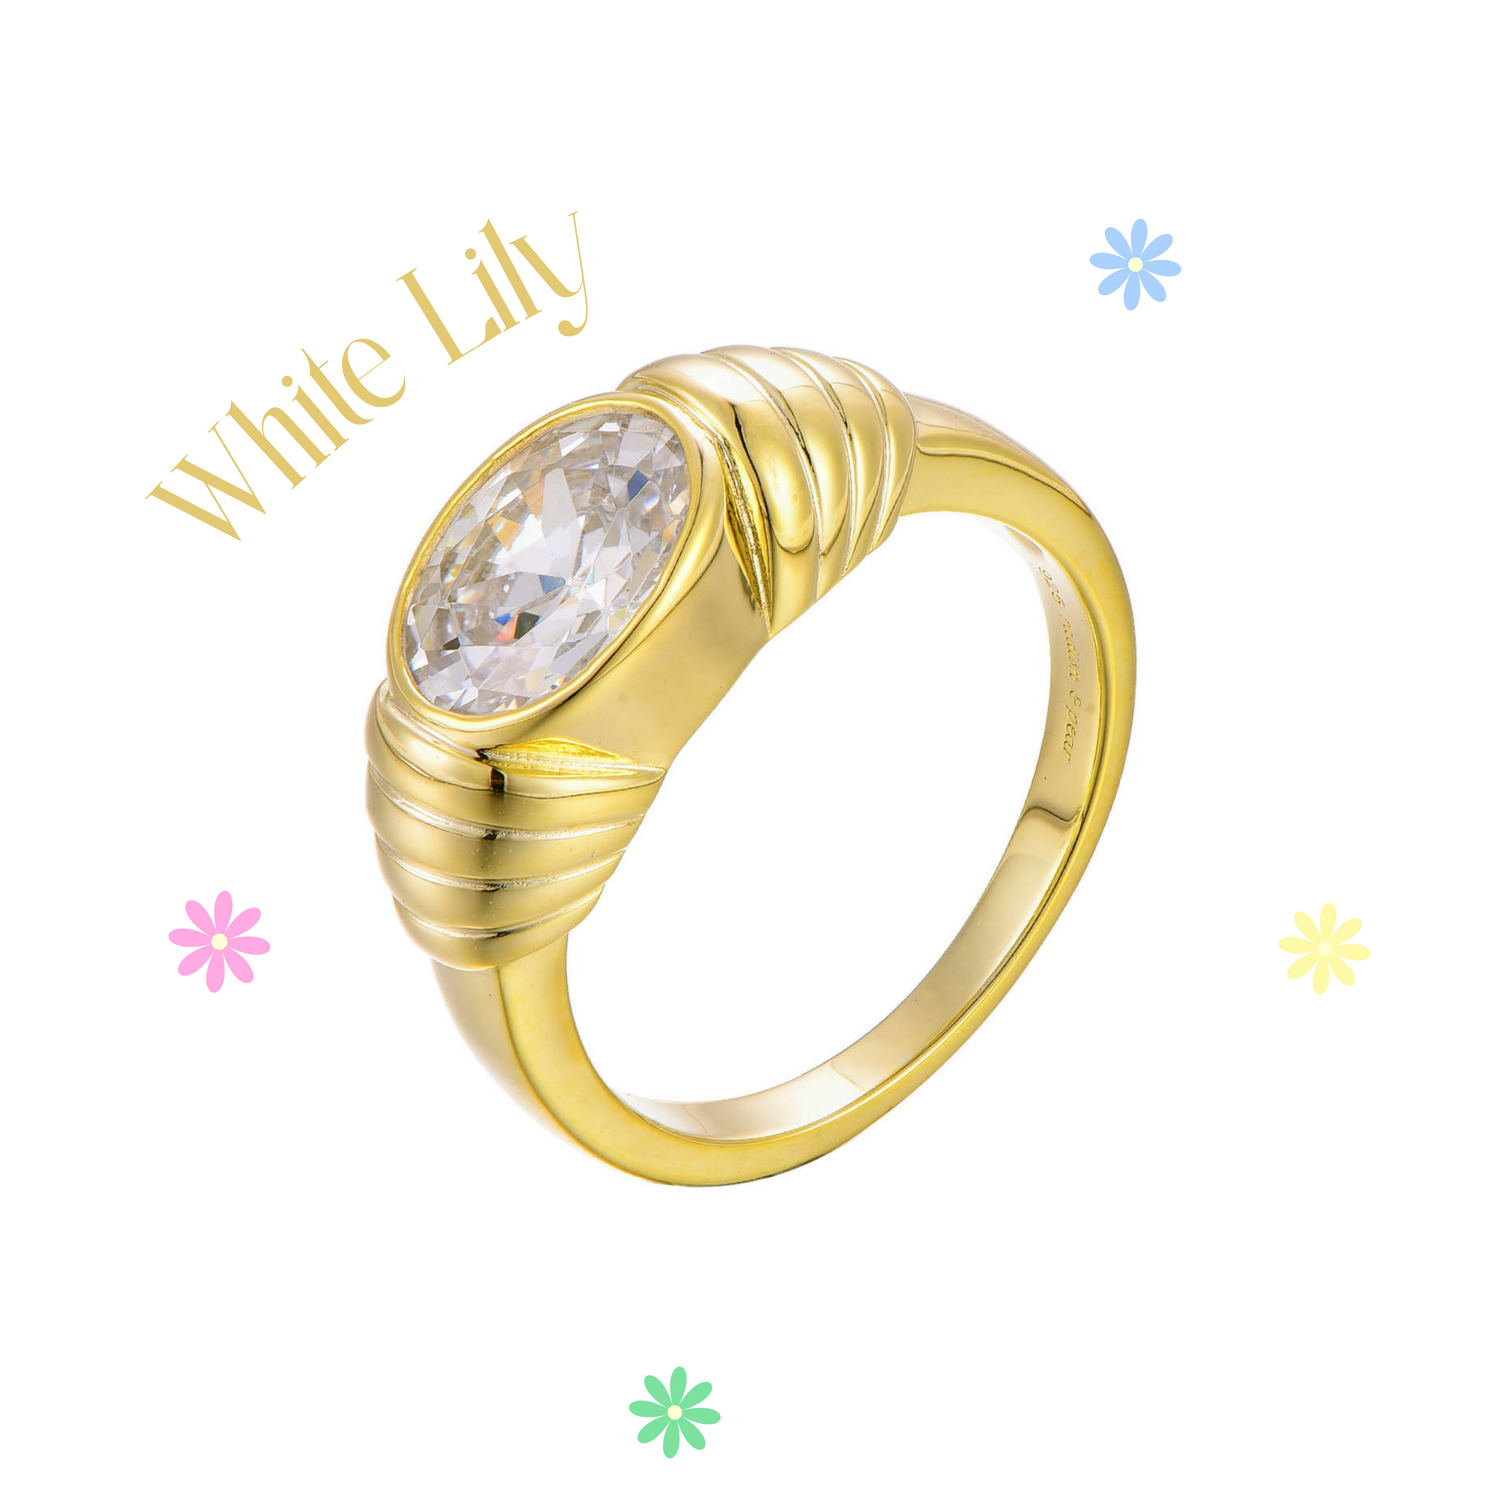 White Lily - Gold Ring